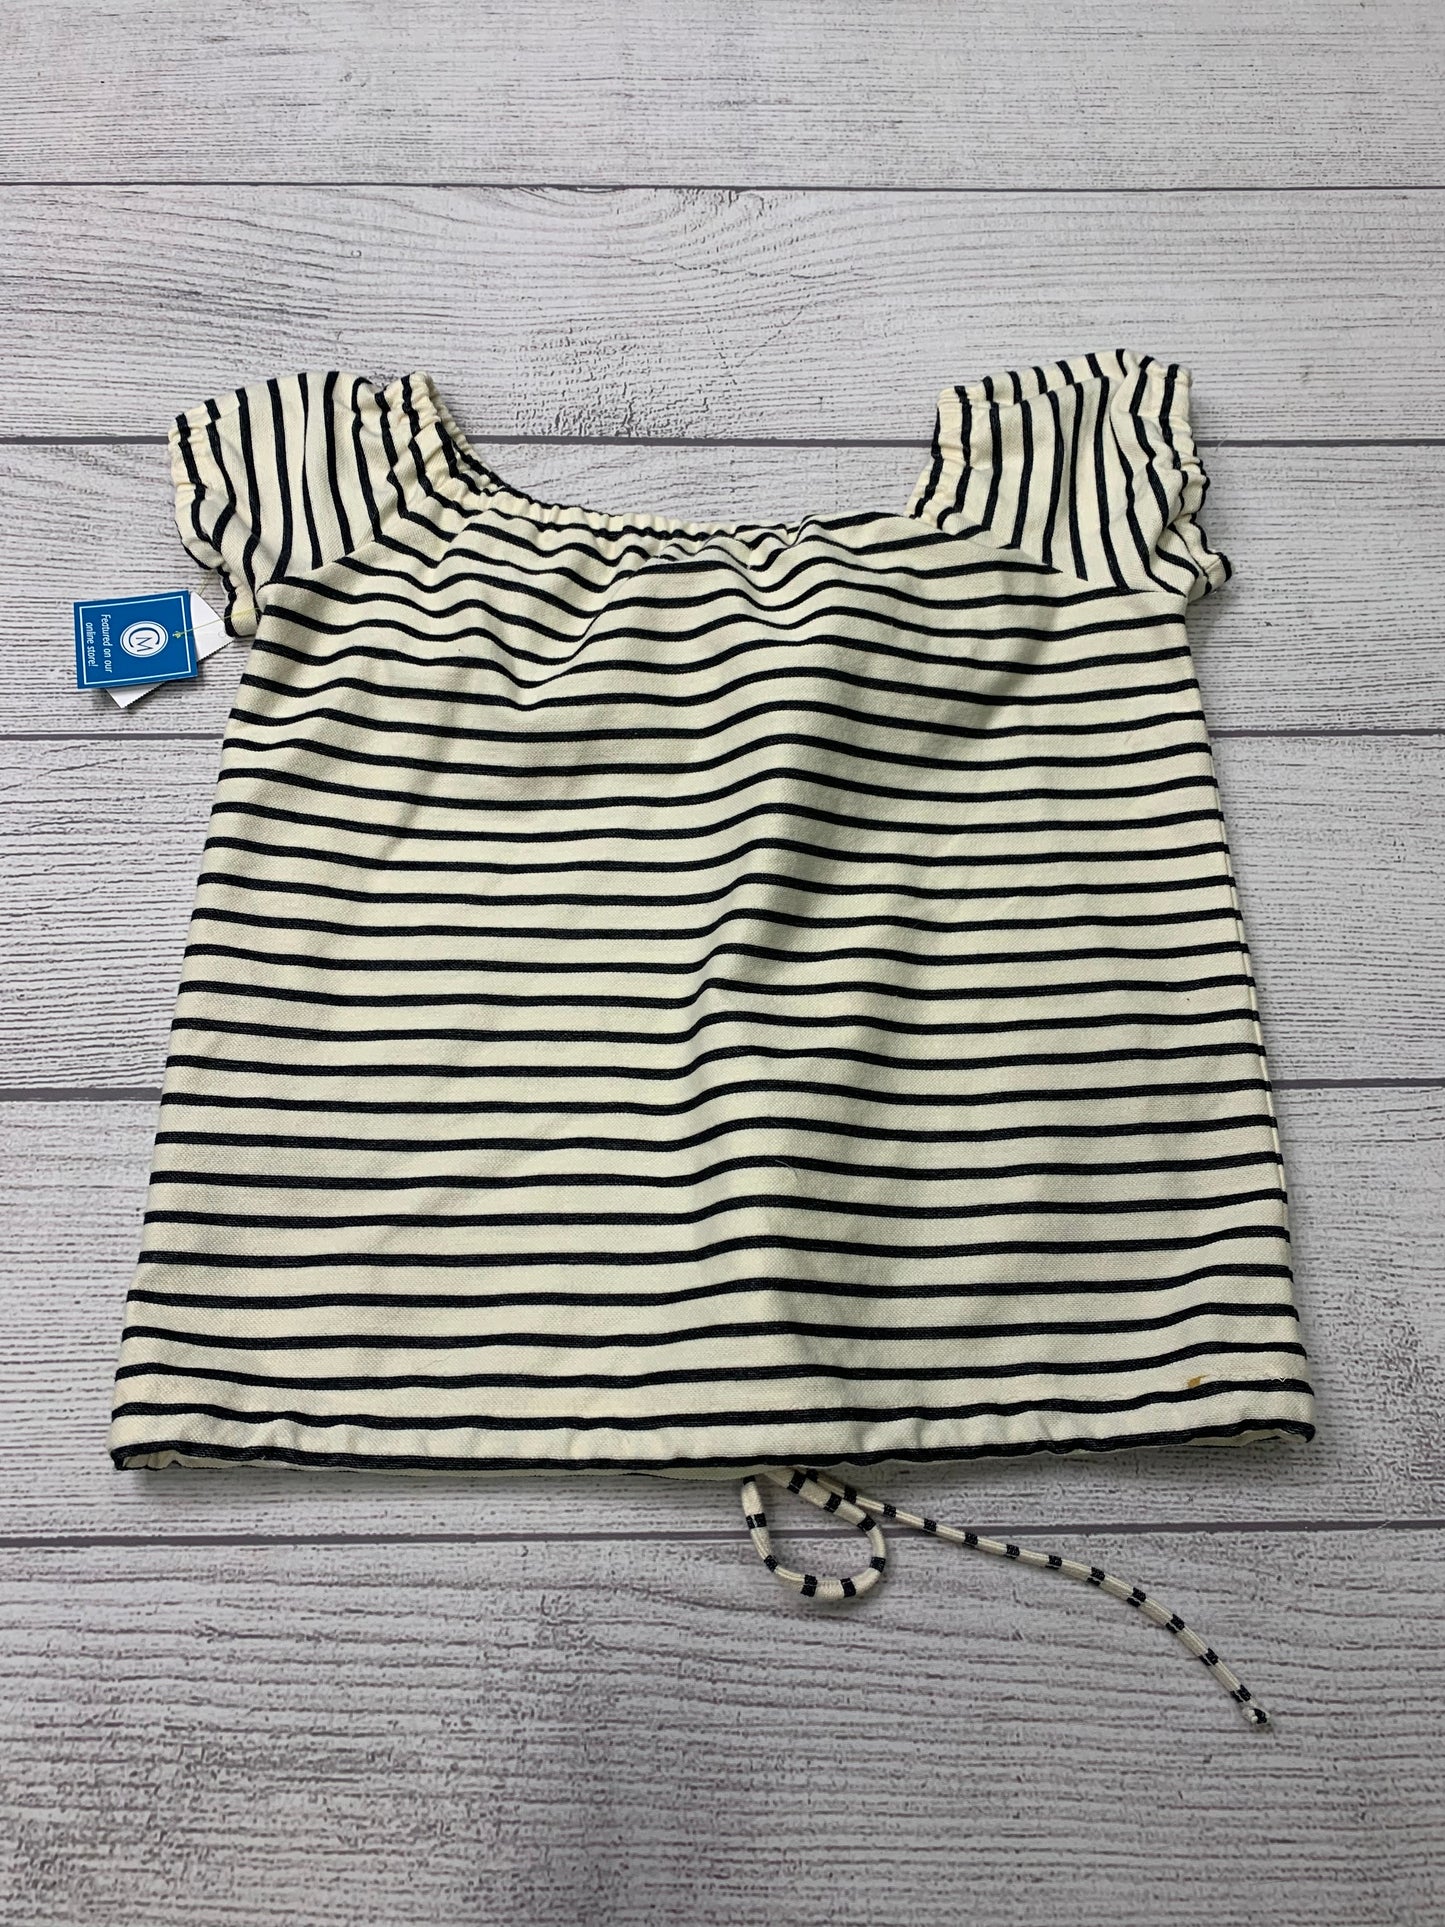 Striped Top Short Sleeve Madewell, Size S